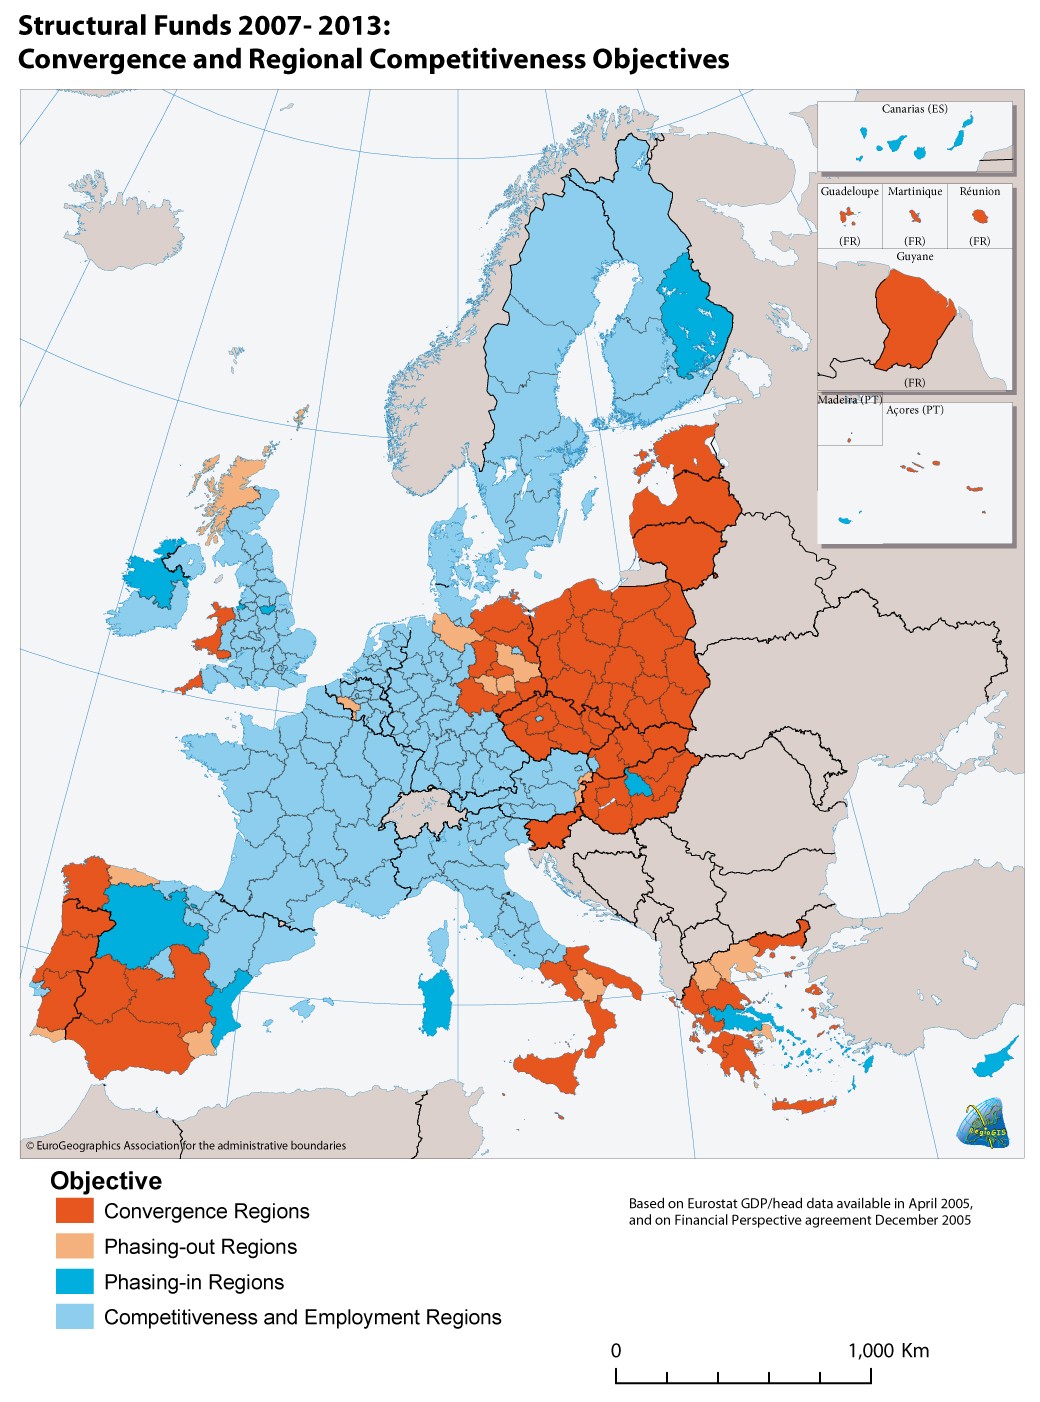 Full article: Territorial competitiveness, cohesion and